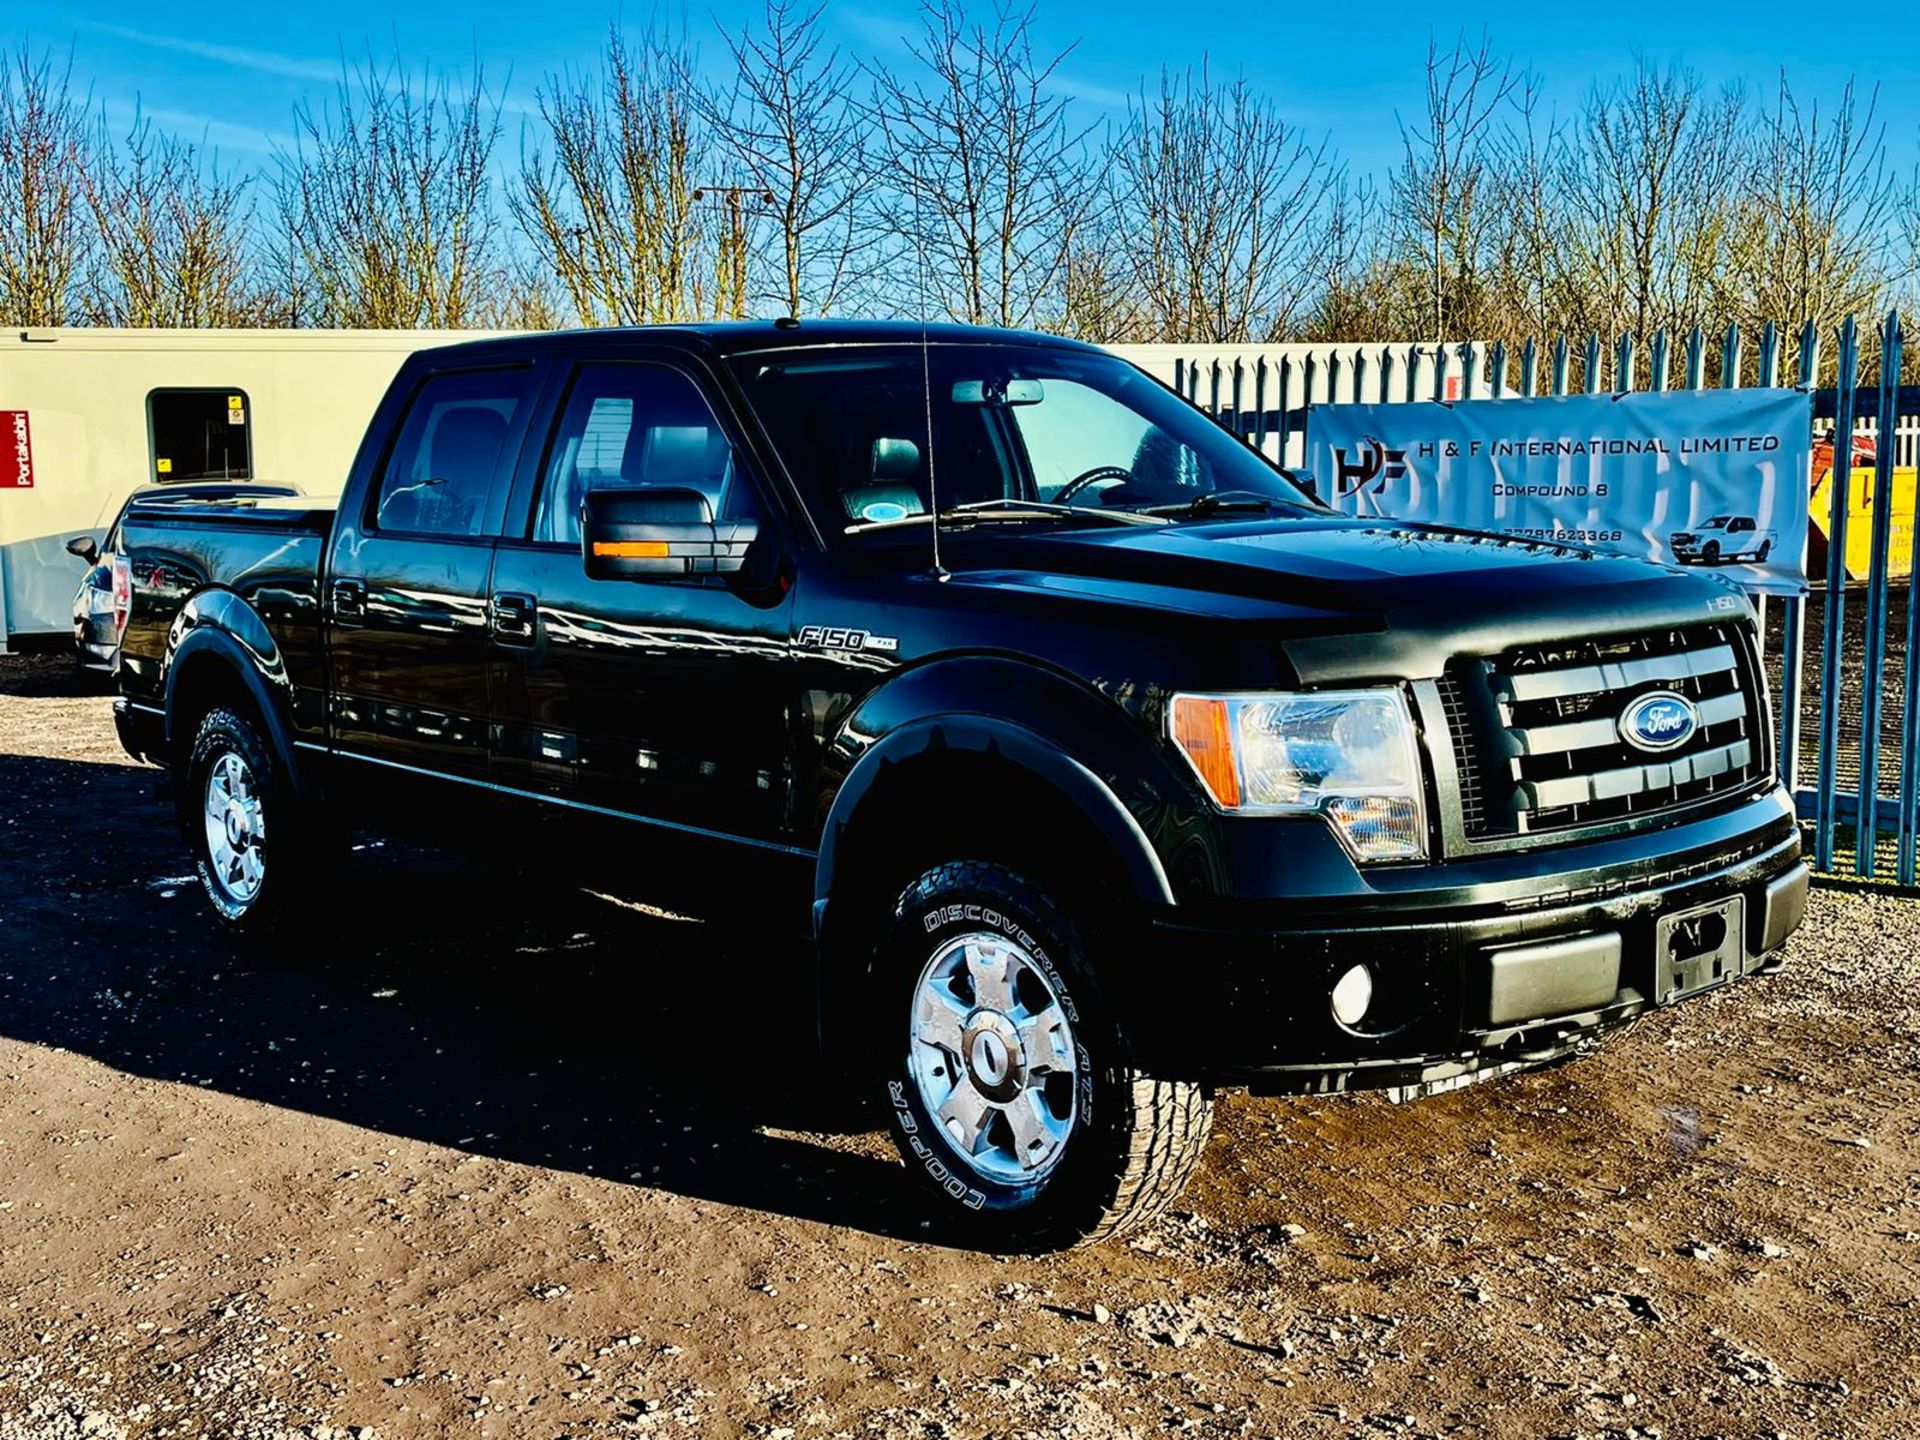 Ford F-150 5.4L V8 SuperCab 4WD FX4 Edition '2010 Year' Colour Coded Package - Top Spec